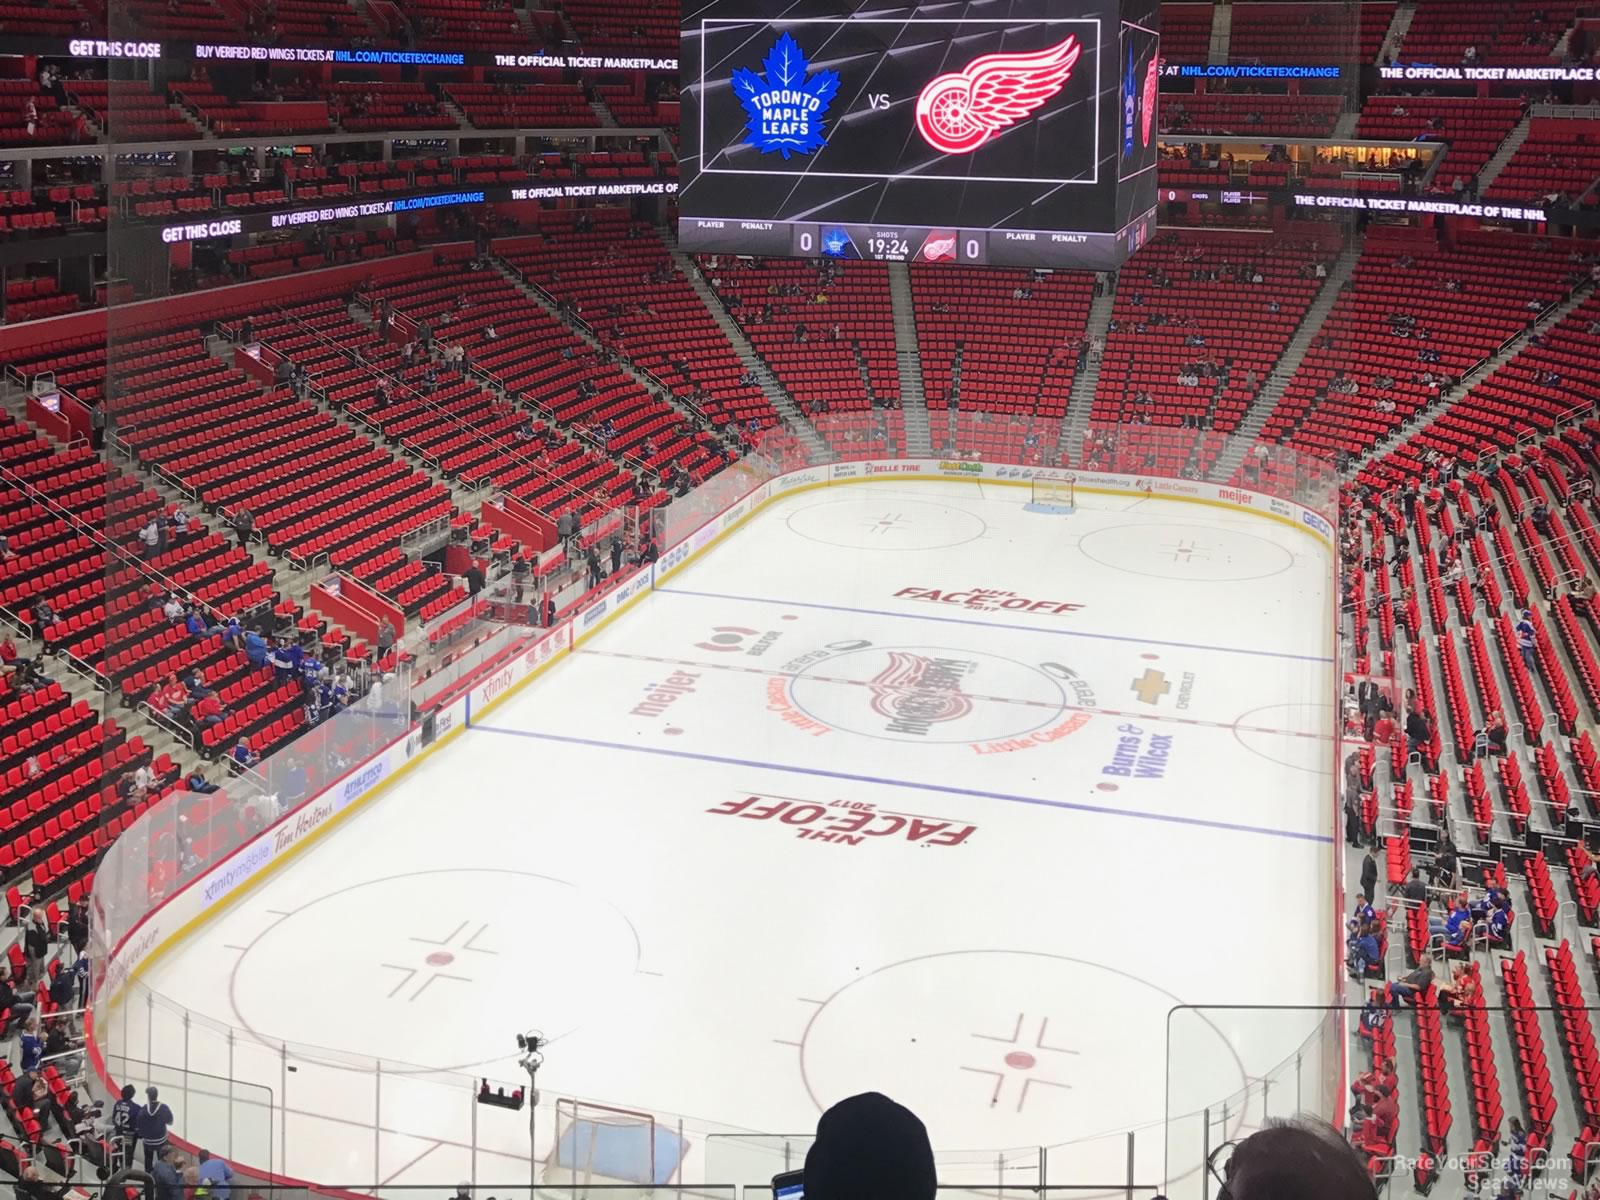 Detroit Red Wings Seating Chart With Rows